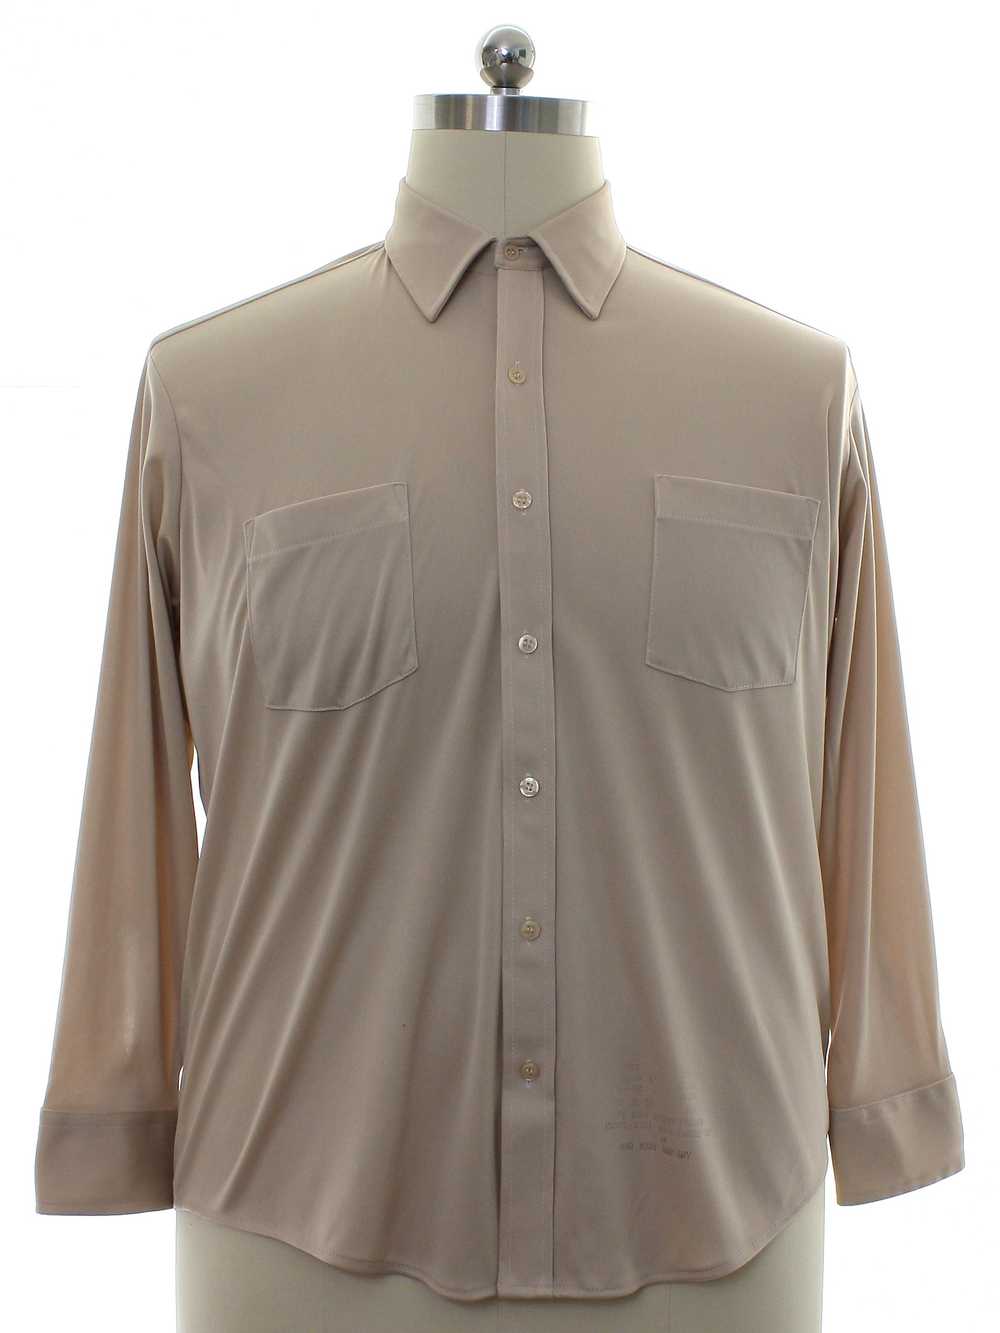 1970's Sears Mens Solid Disco Shirt - image 1